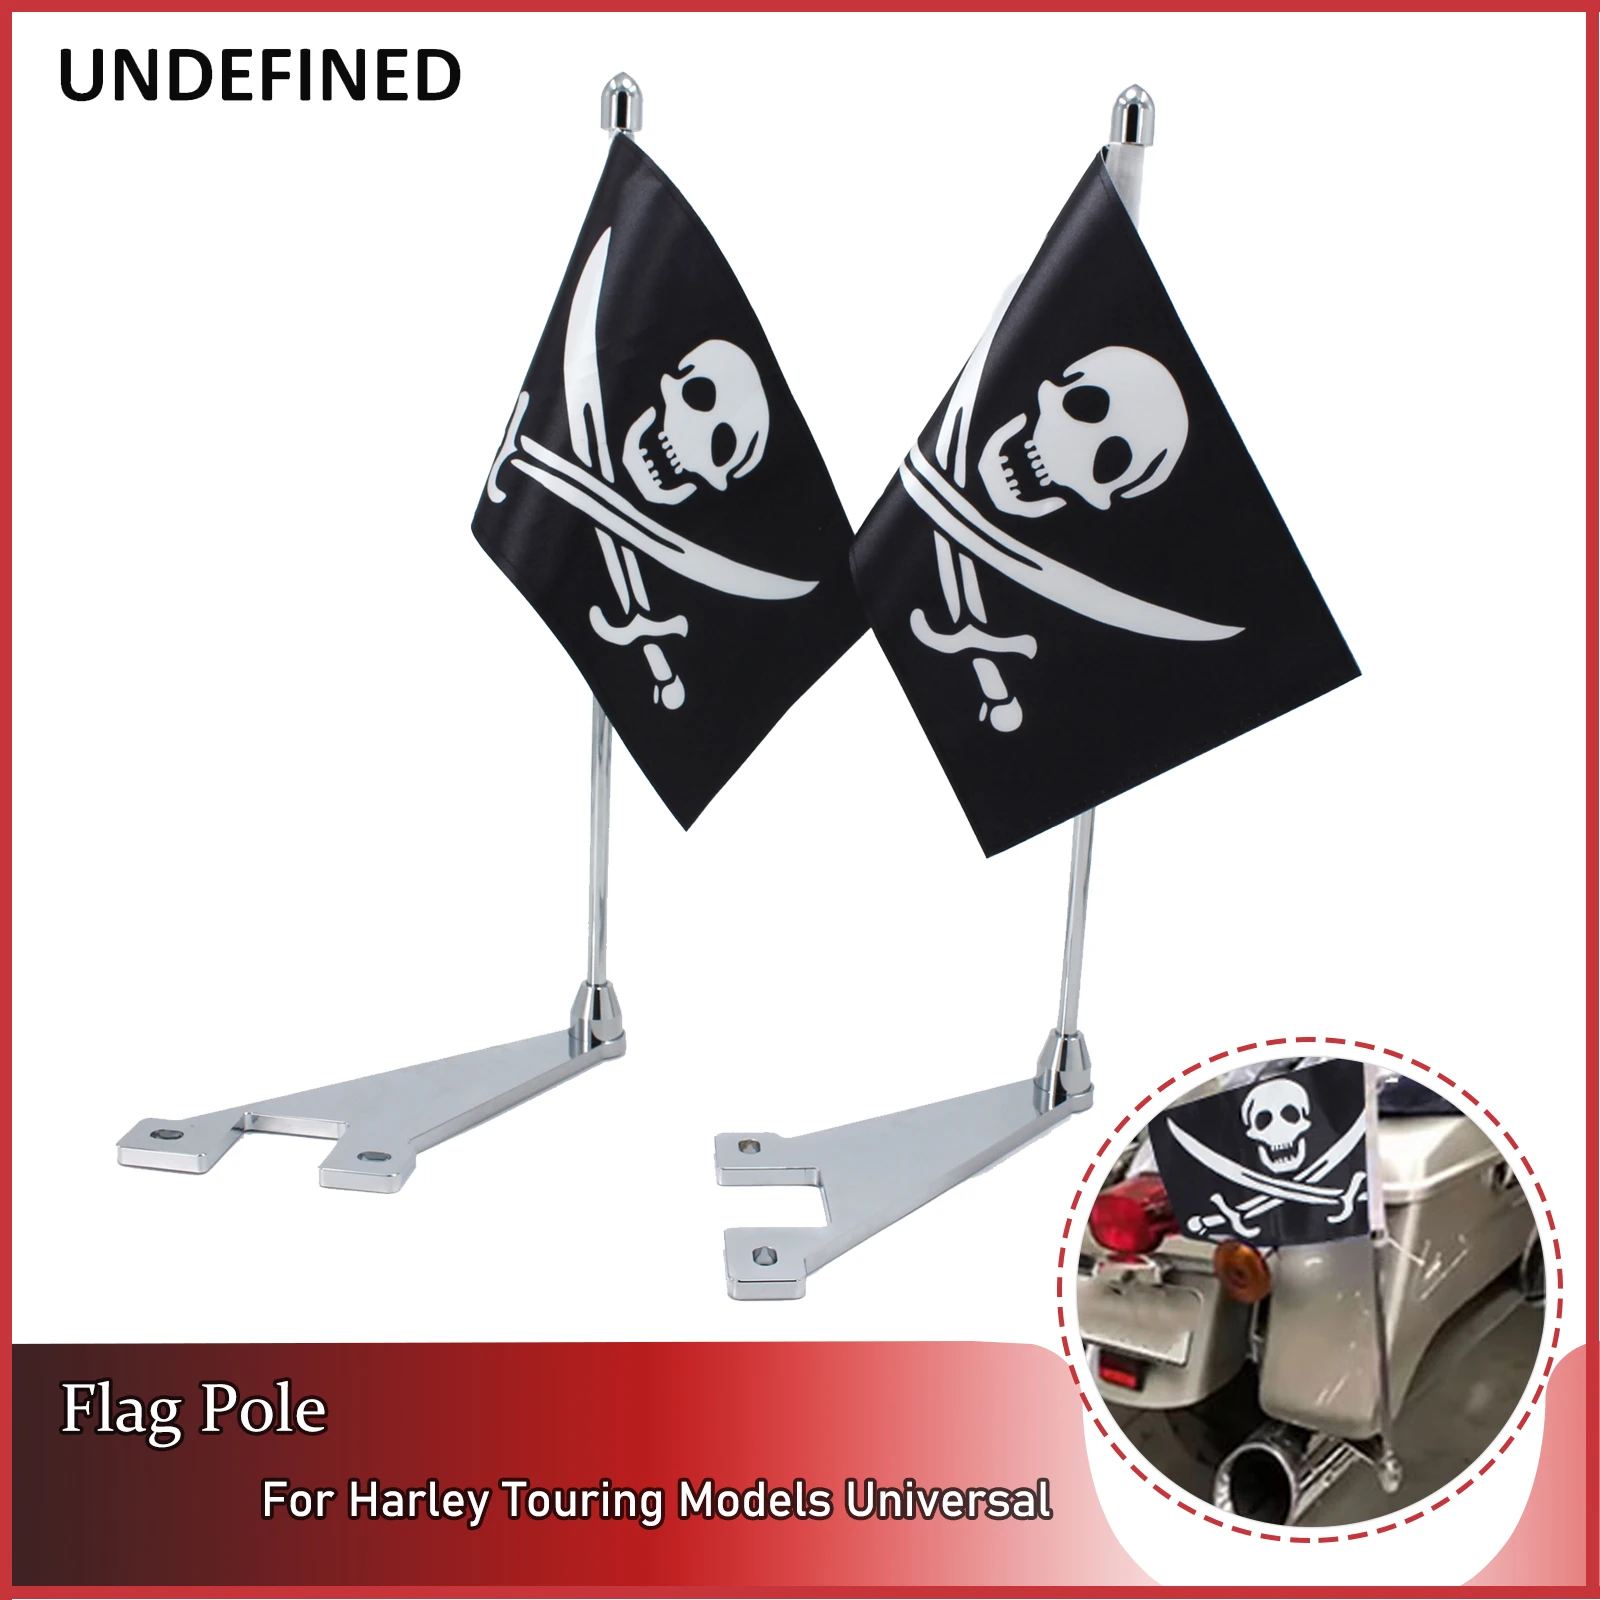 2PCS Motorcycle Pirate Flag Silver Rear Side Mount Pole Chrome Skull For Harley Luggage Rack Motorcycle Decorative Halloween